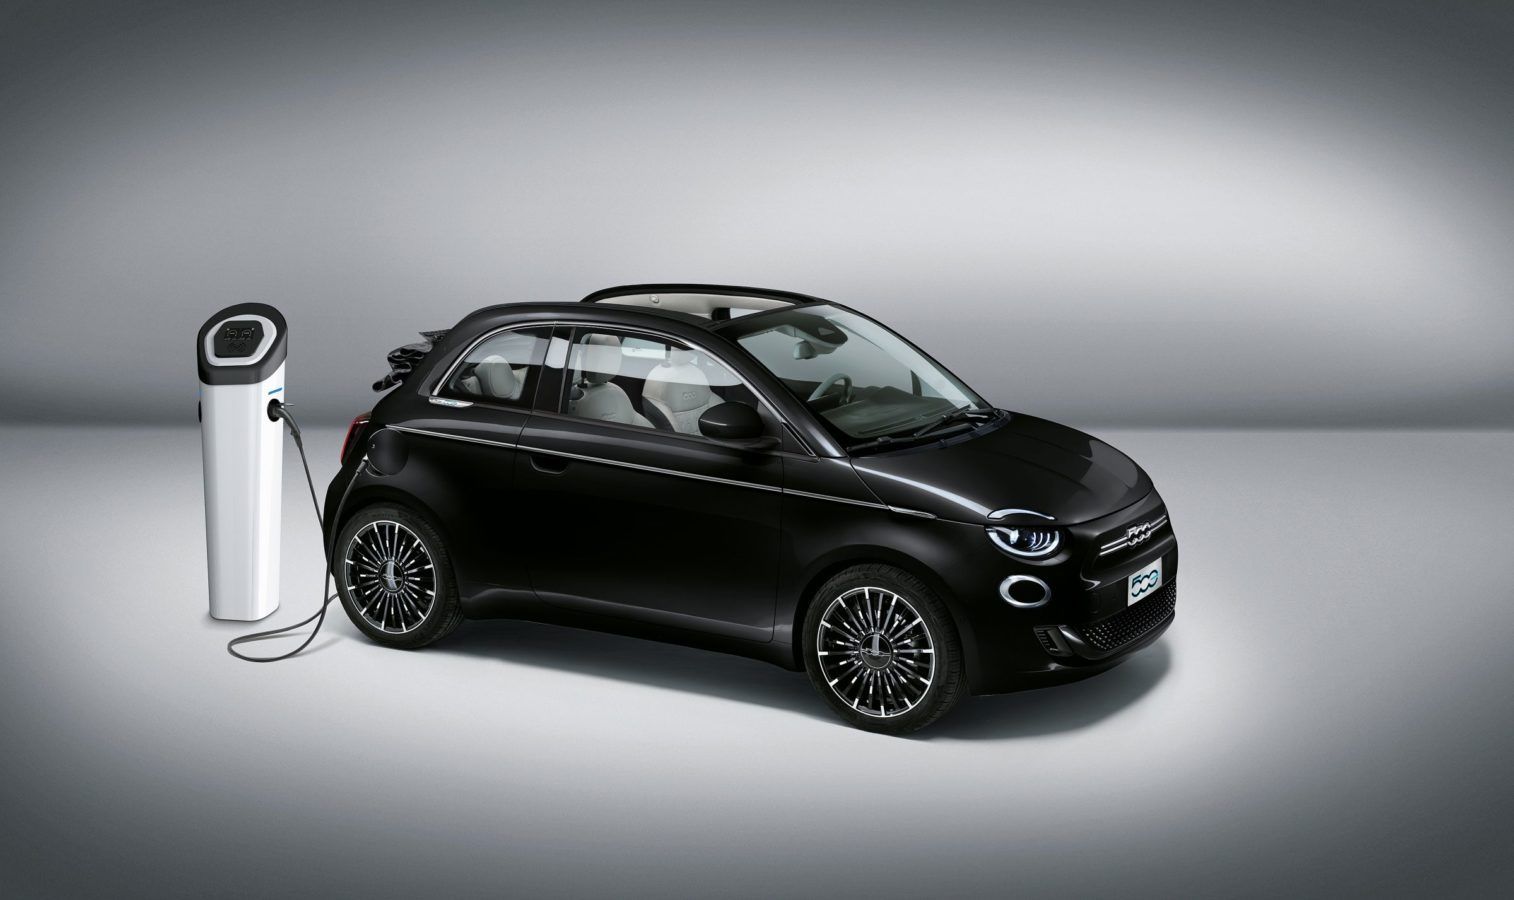 Italian Tenor Andrea Bocelli collaborates with Fiat for a limited edition new 500